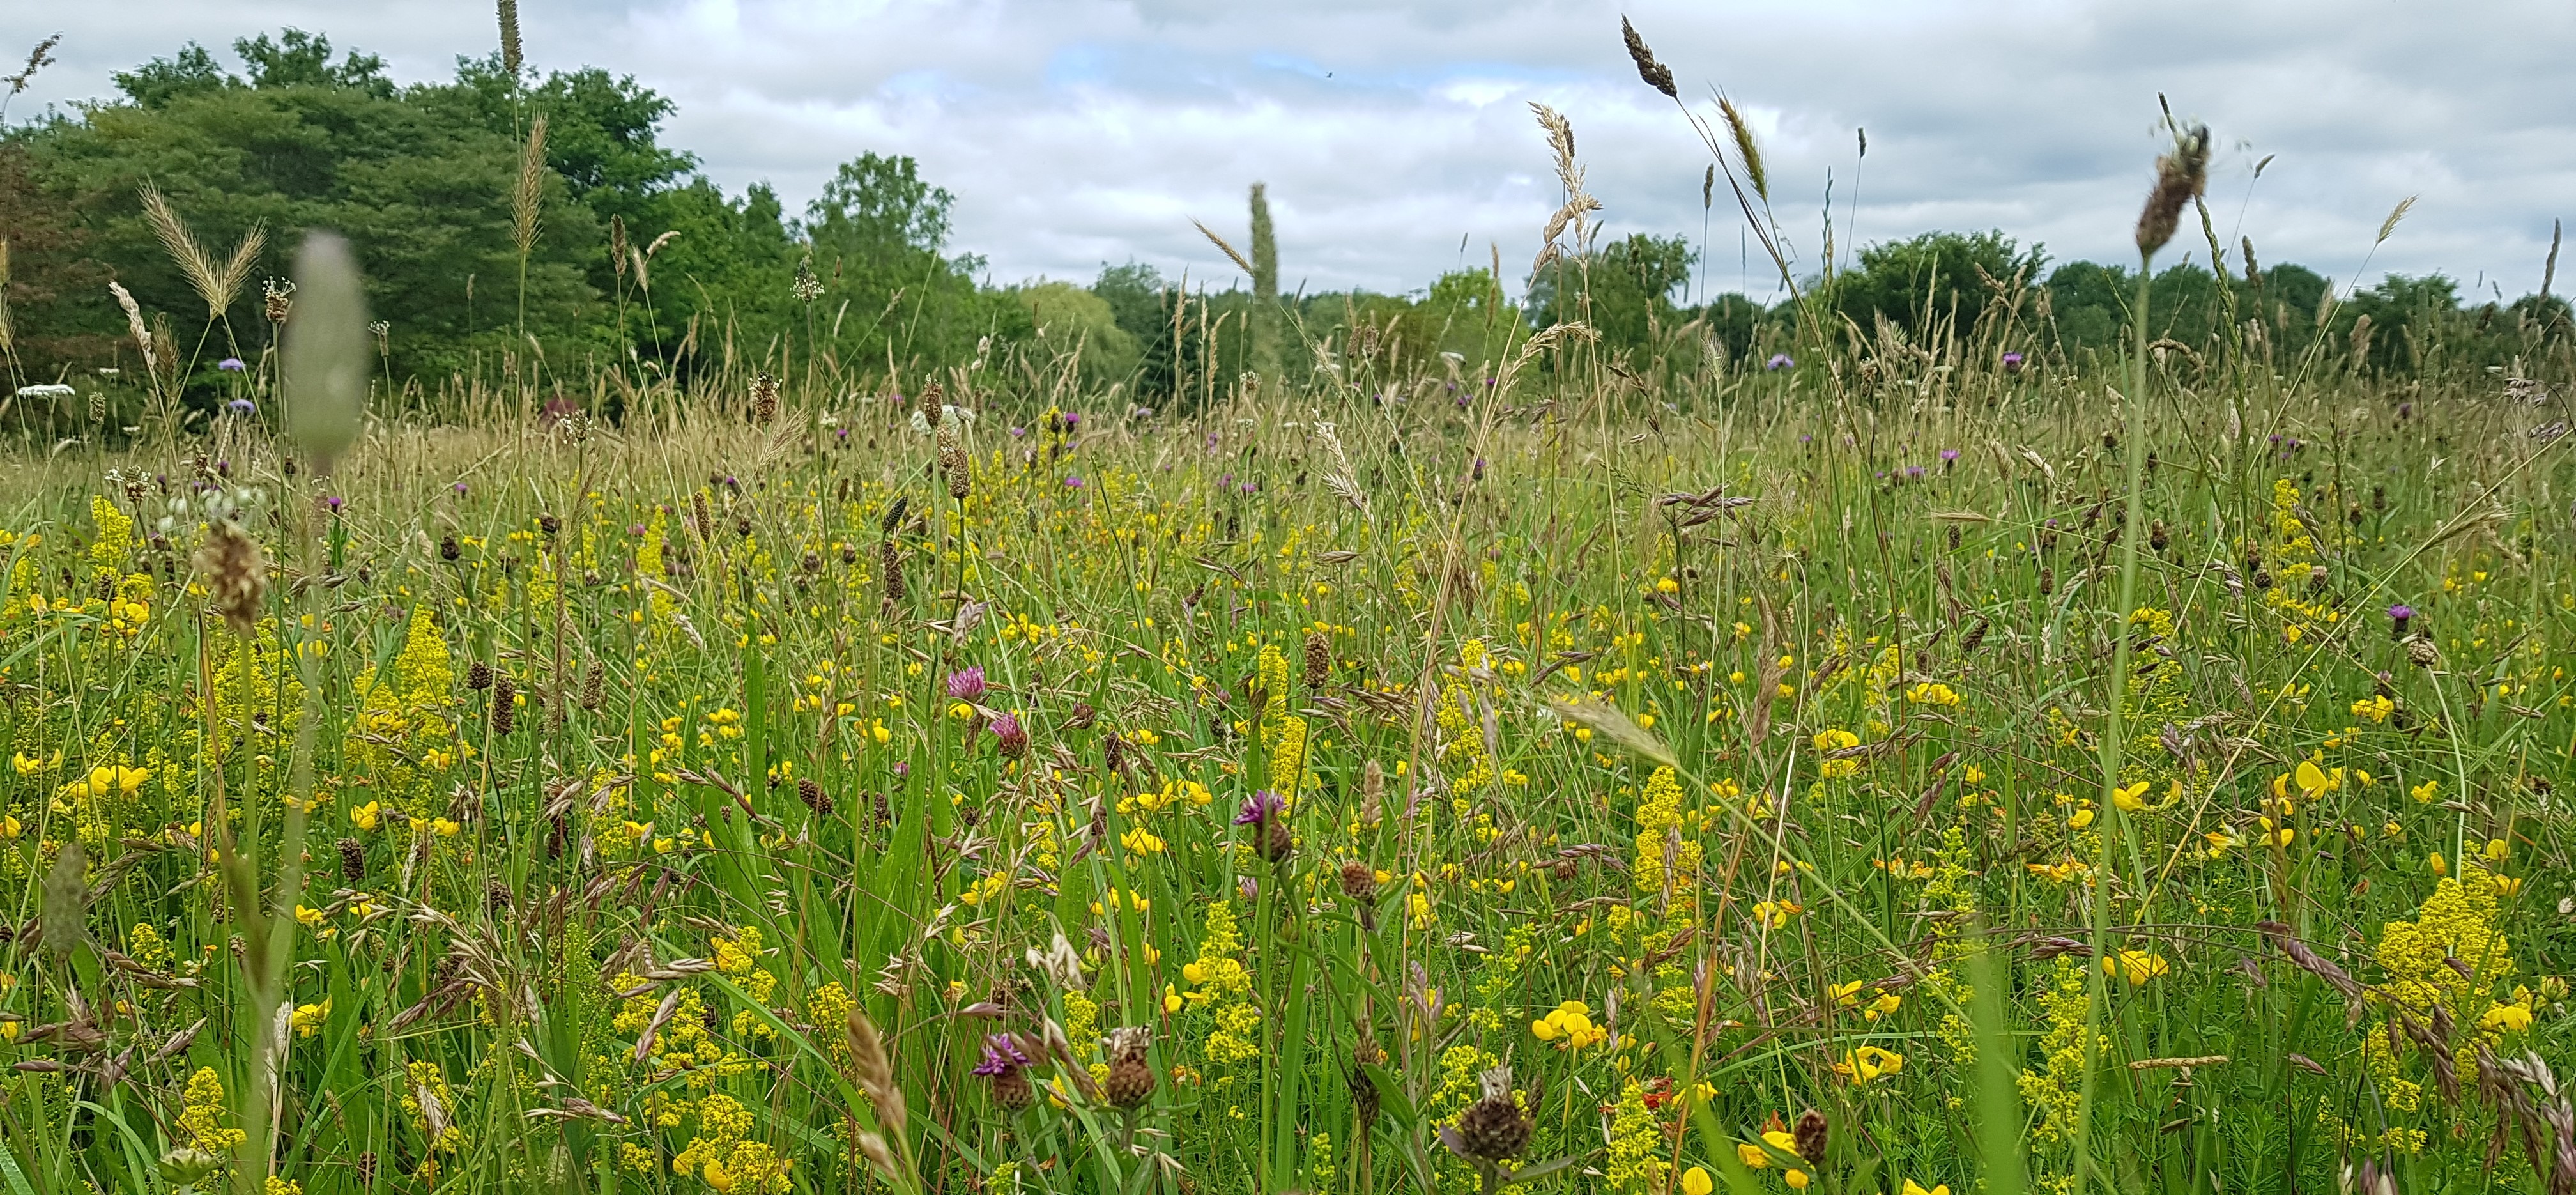 A wildflower meadow in the Forest arboretum 